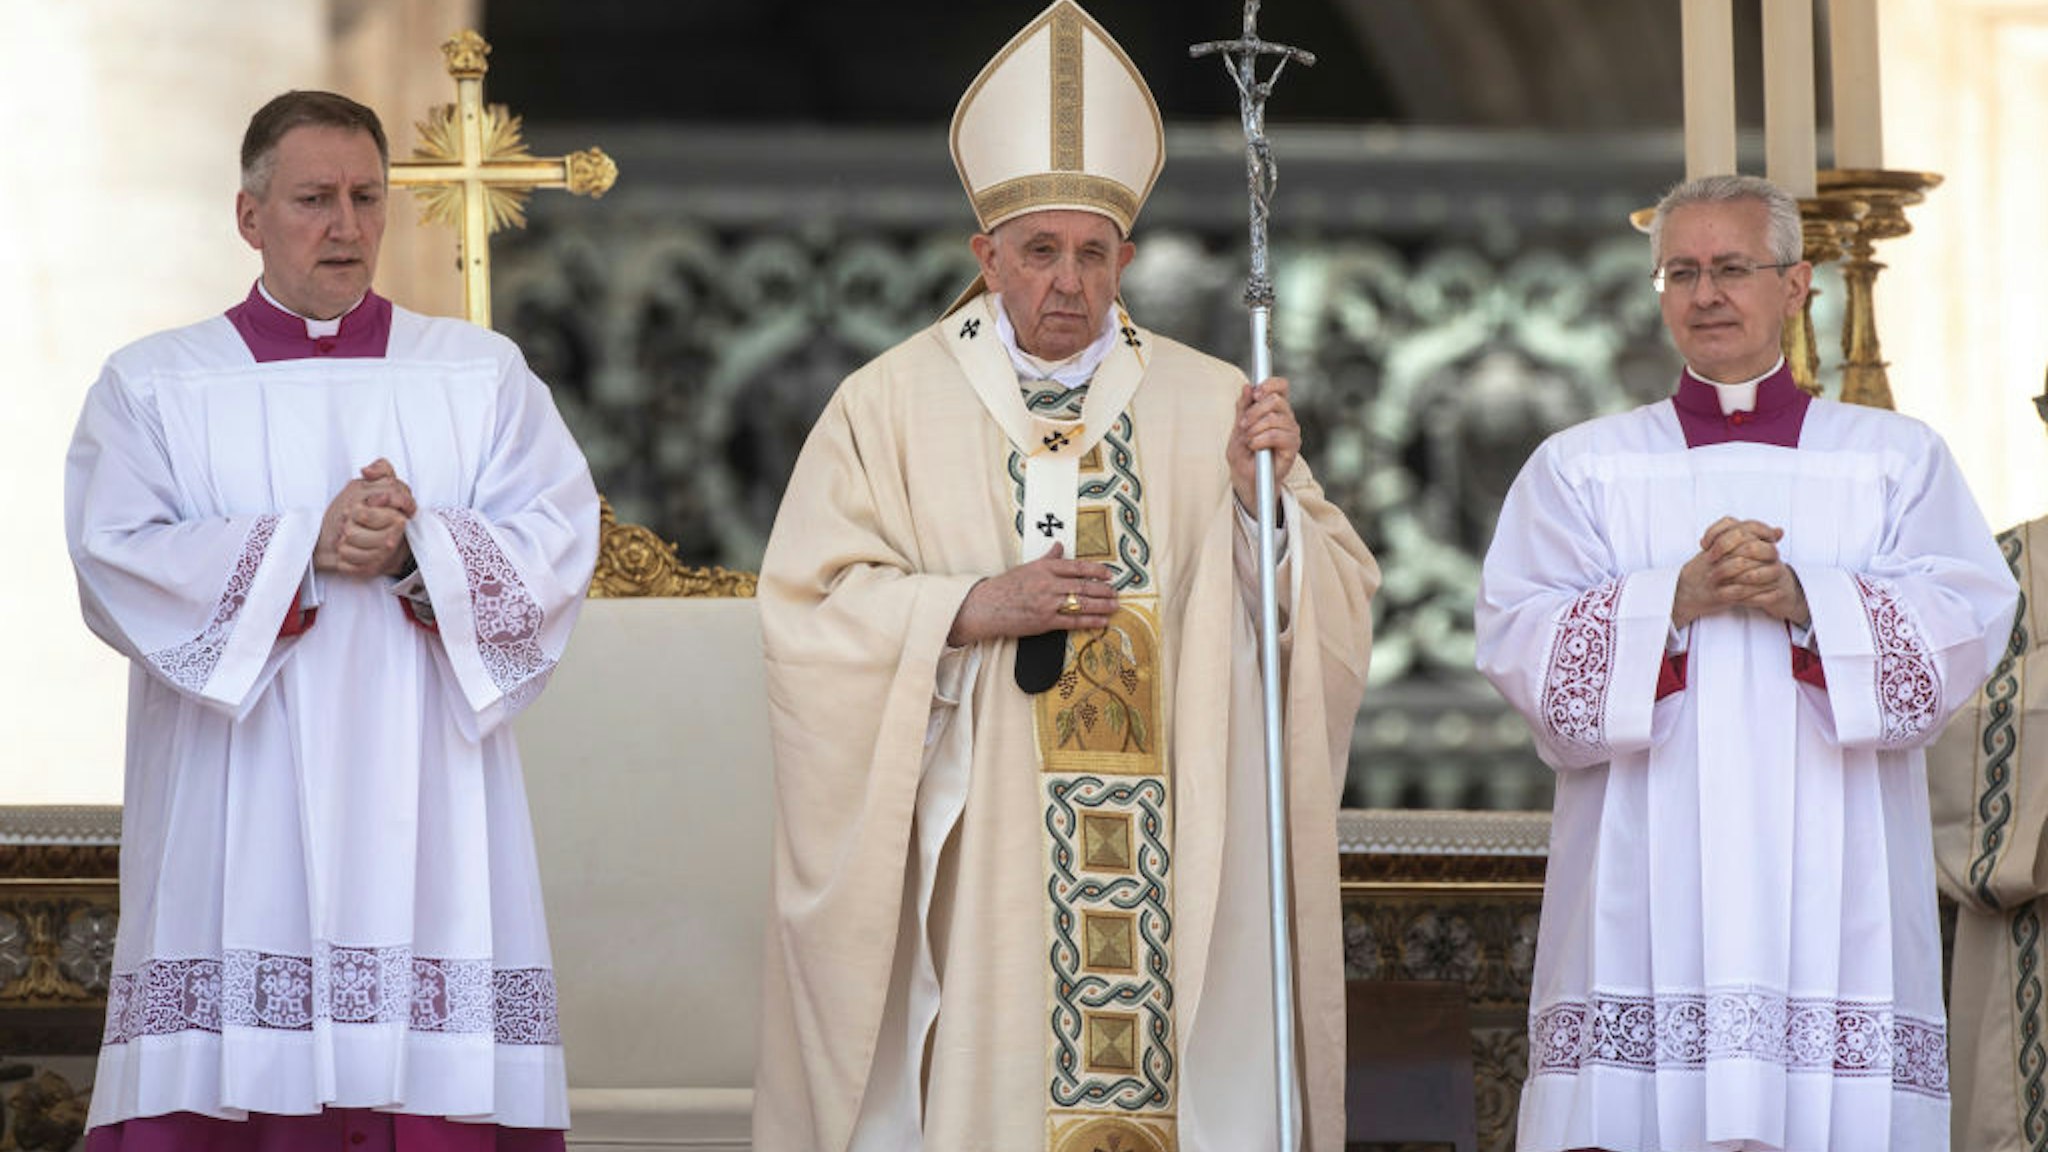 VATICAN CITY, VATICAN - MAY 15: Pope Francis names ten new saints during a canonization mass in St. Peter's Square, on May 15, 2022 in Vatican City, Vatican. At the beginning of the liturgical celebration, the Pope proclaimed new saints: Titus Brandsma, Lazzarus Devasahayam, César de Bus, Luigi Maria Palazzolo, Giustino Maria Russolillo, Charles de Foucauld, Maria Rivier, Maria Francesca of Jesus Rubatto, Maria of Jesus Santocanale and Maria Domenica Mantovani, five from Italy, three from France, one from India and one from the Netherlands. (Photo by Alessandra Benedetti - Corbis/Corbis via Getty Images)